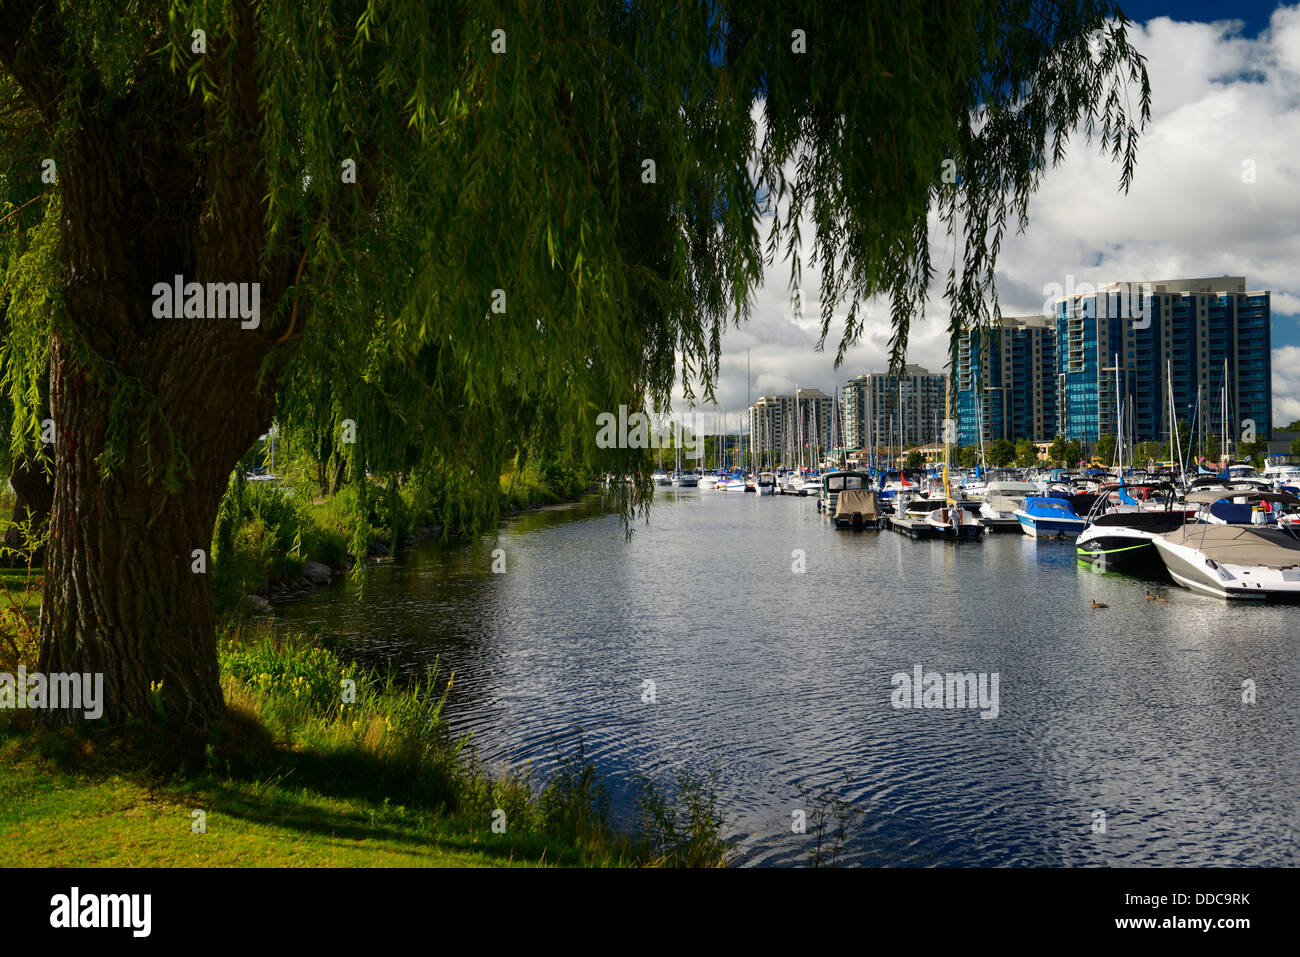 Willow tree over Barrie Ontario Canada Marina on Kempenfelt Bay with boats and condos Stock Photo